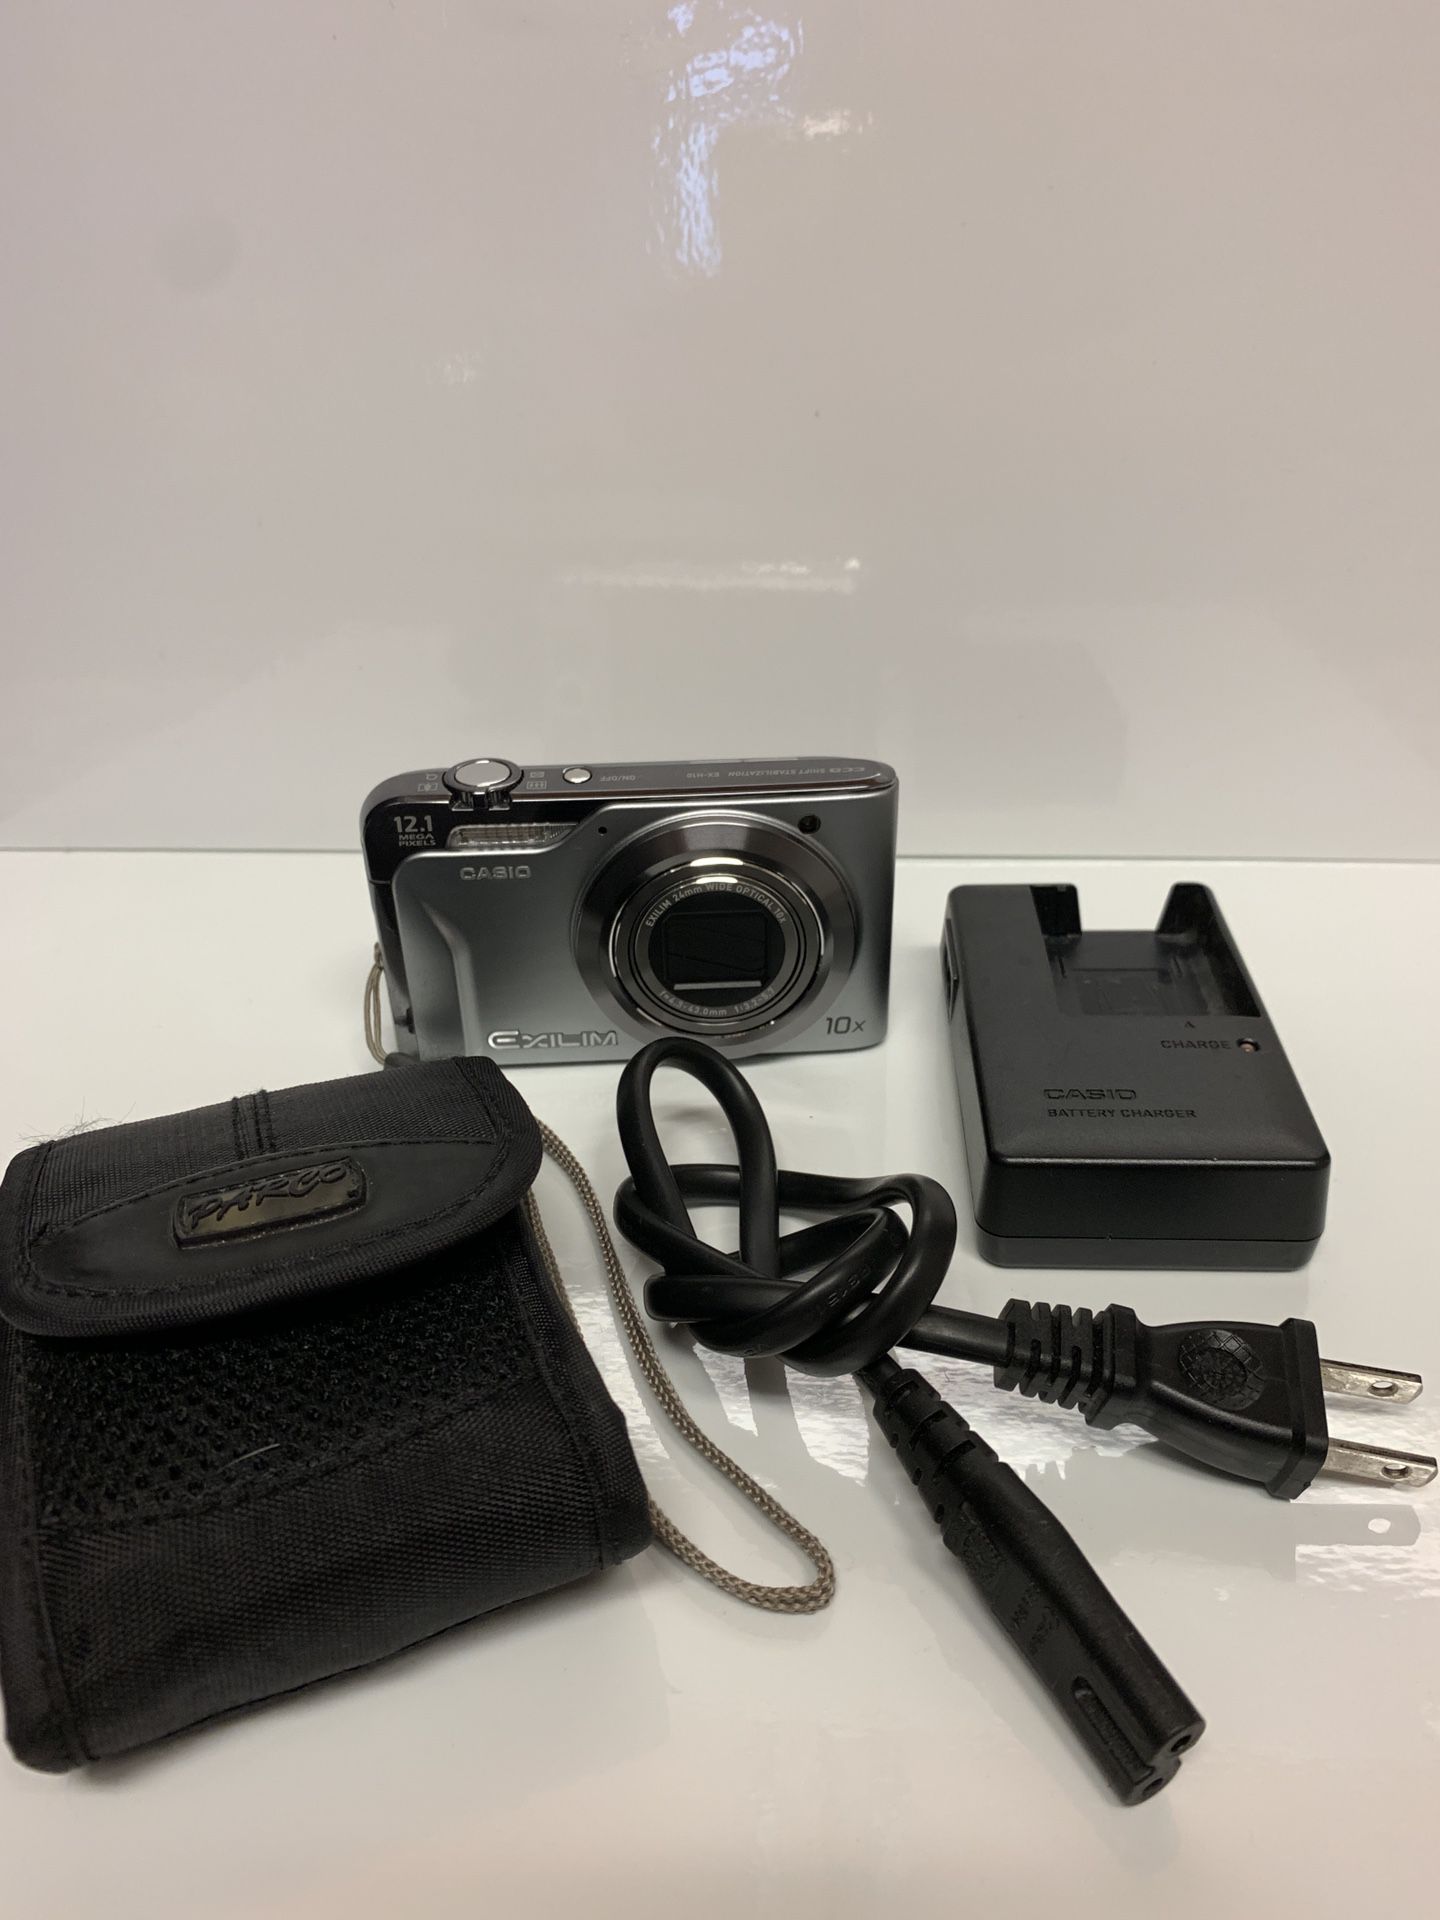 Casio Ex-10 Digital Camera with 12.1 mega pixels-with battery,charger and pouch